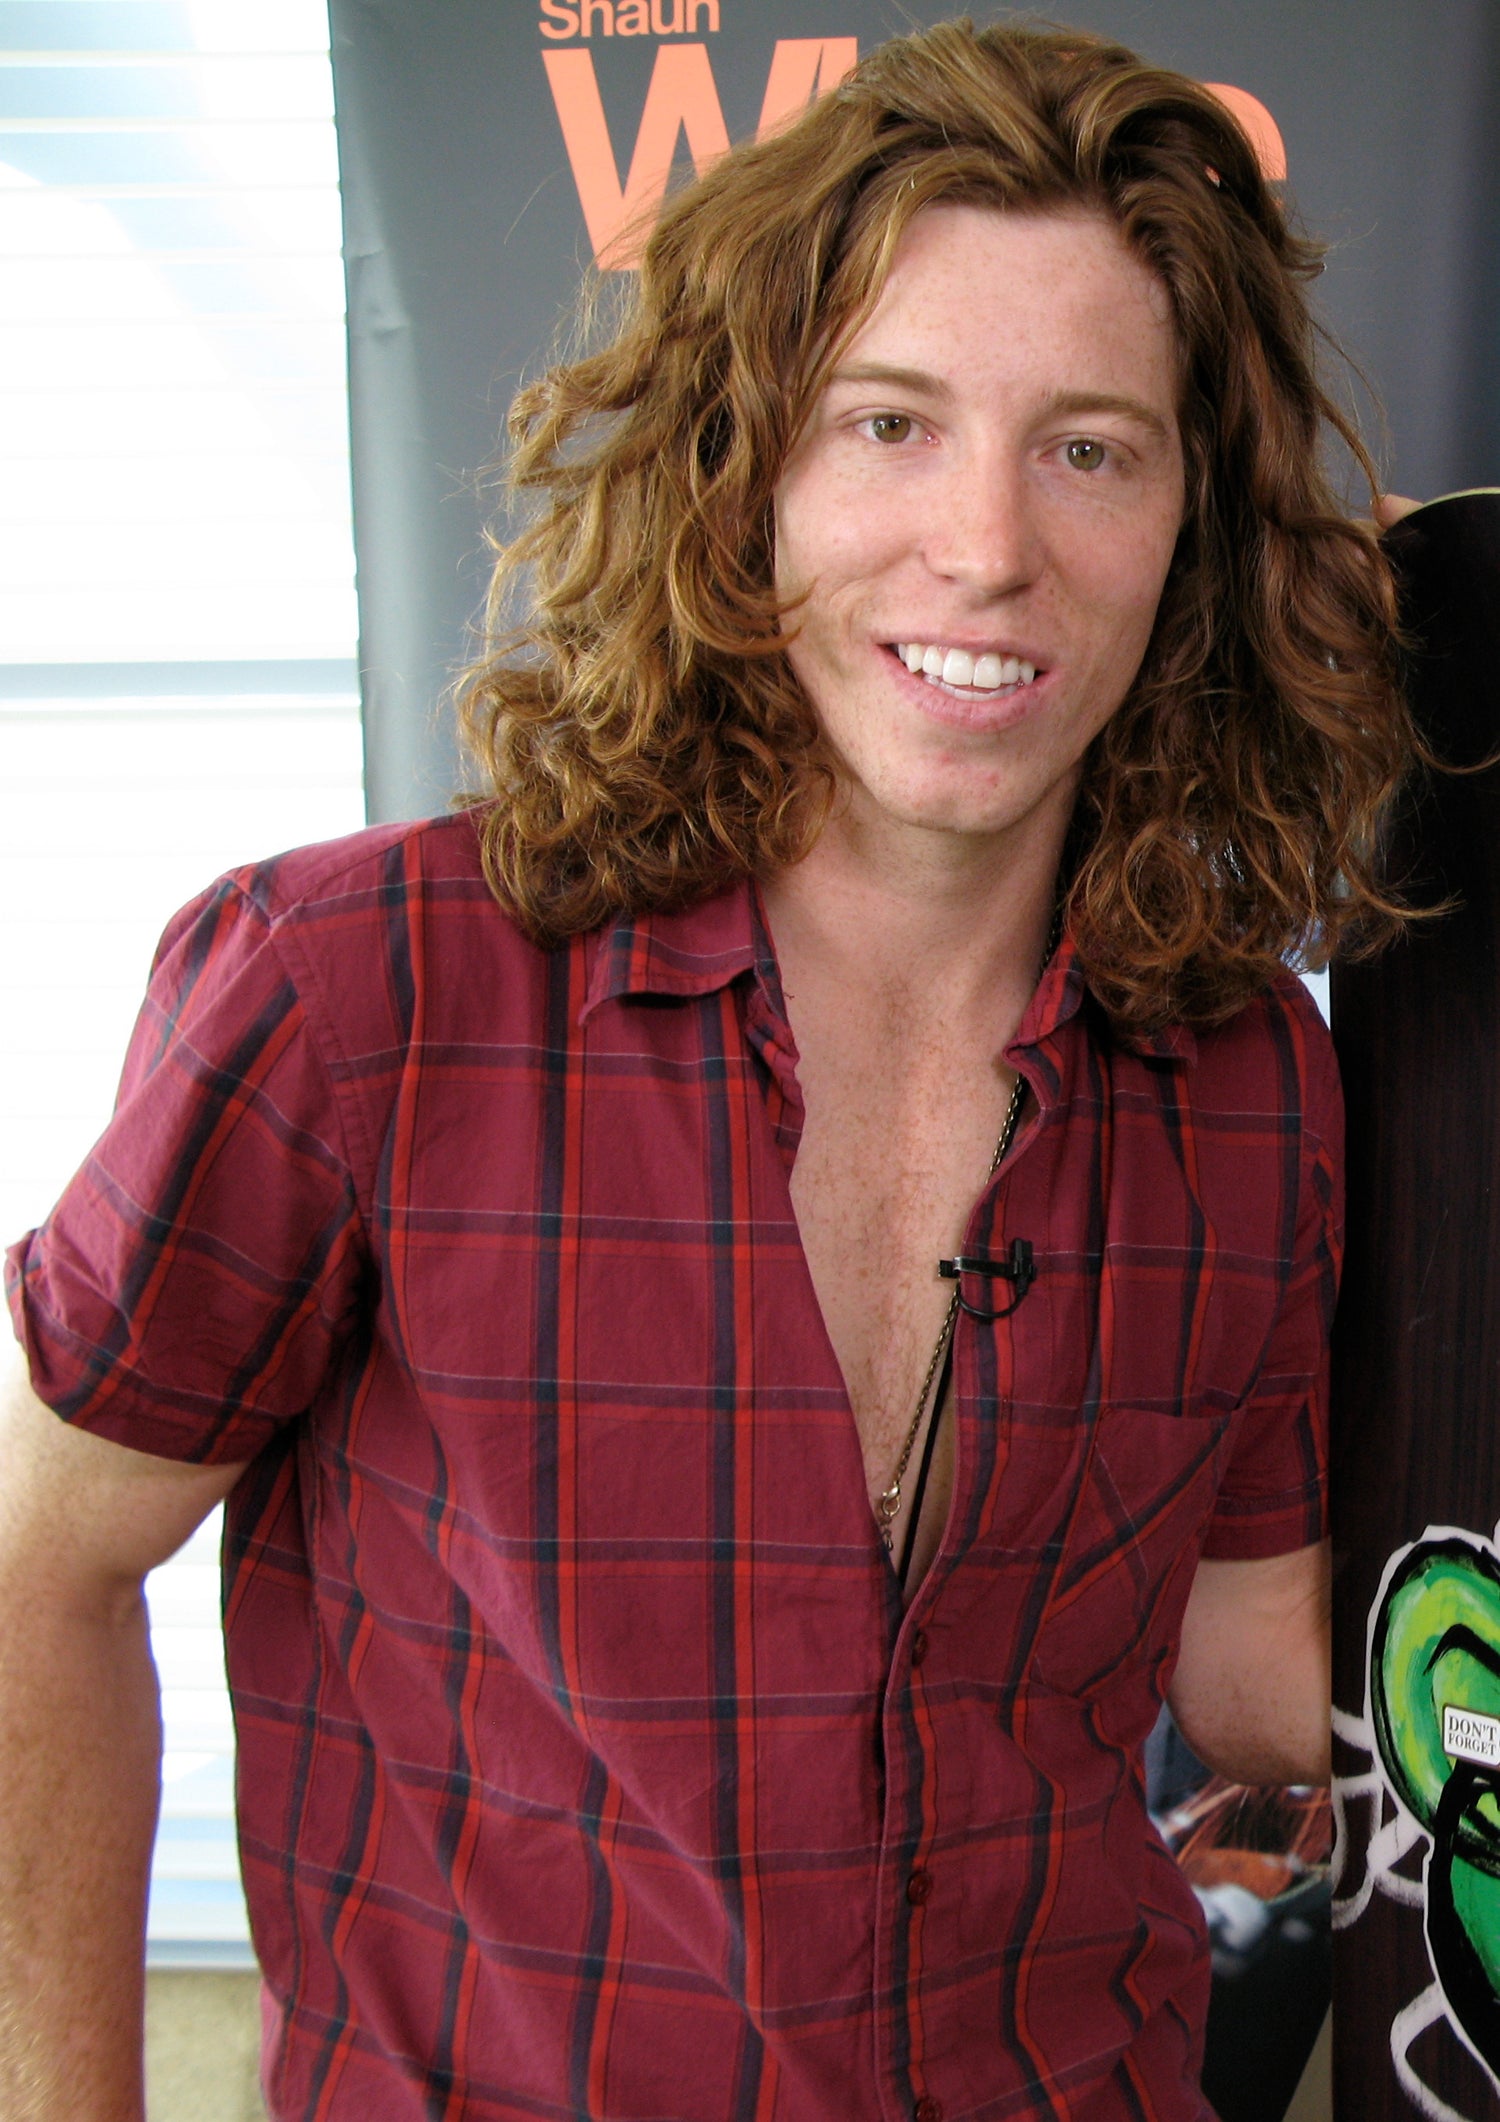 Shaun White's net worth: How much is the former professional